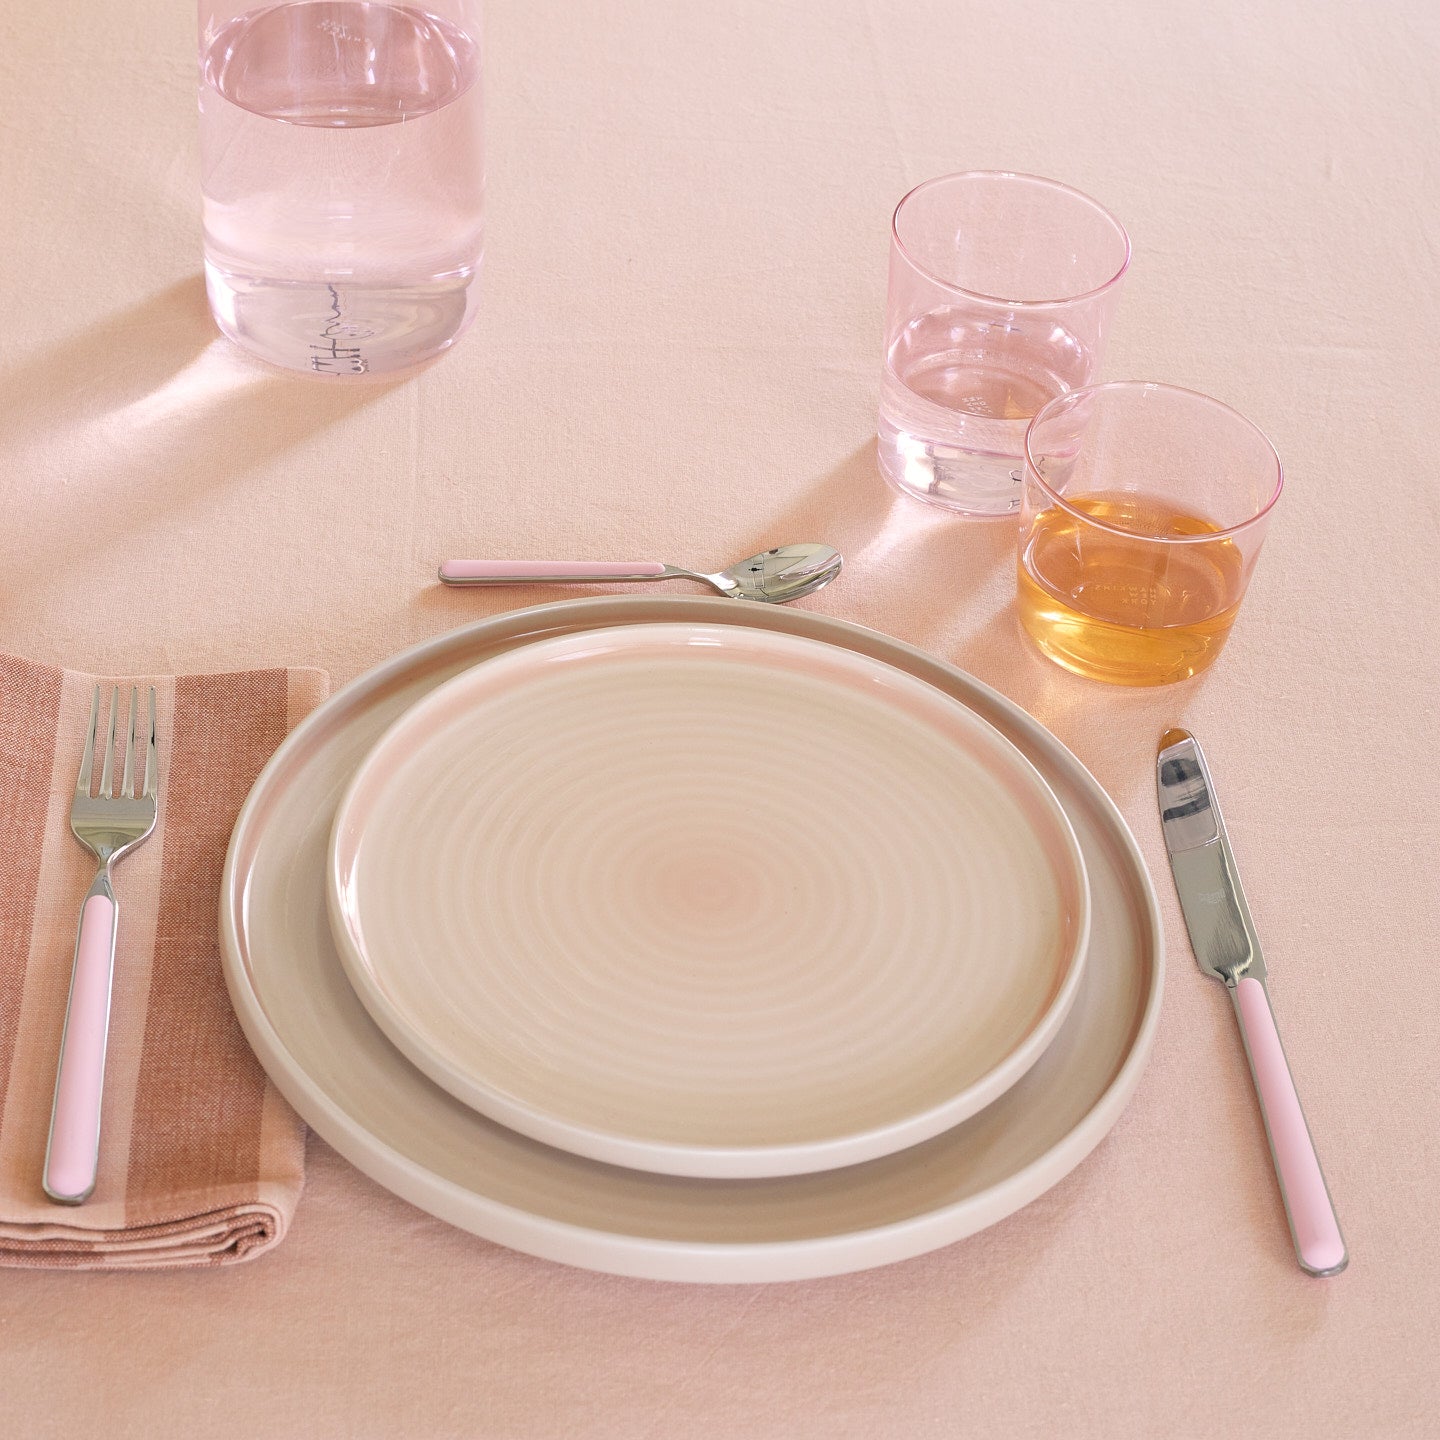 Placesetting with Essential Glassware in Blush on pink tablecloth.